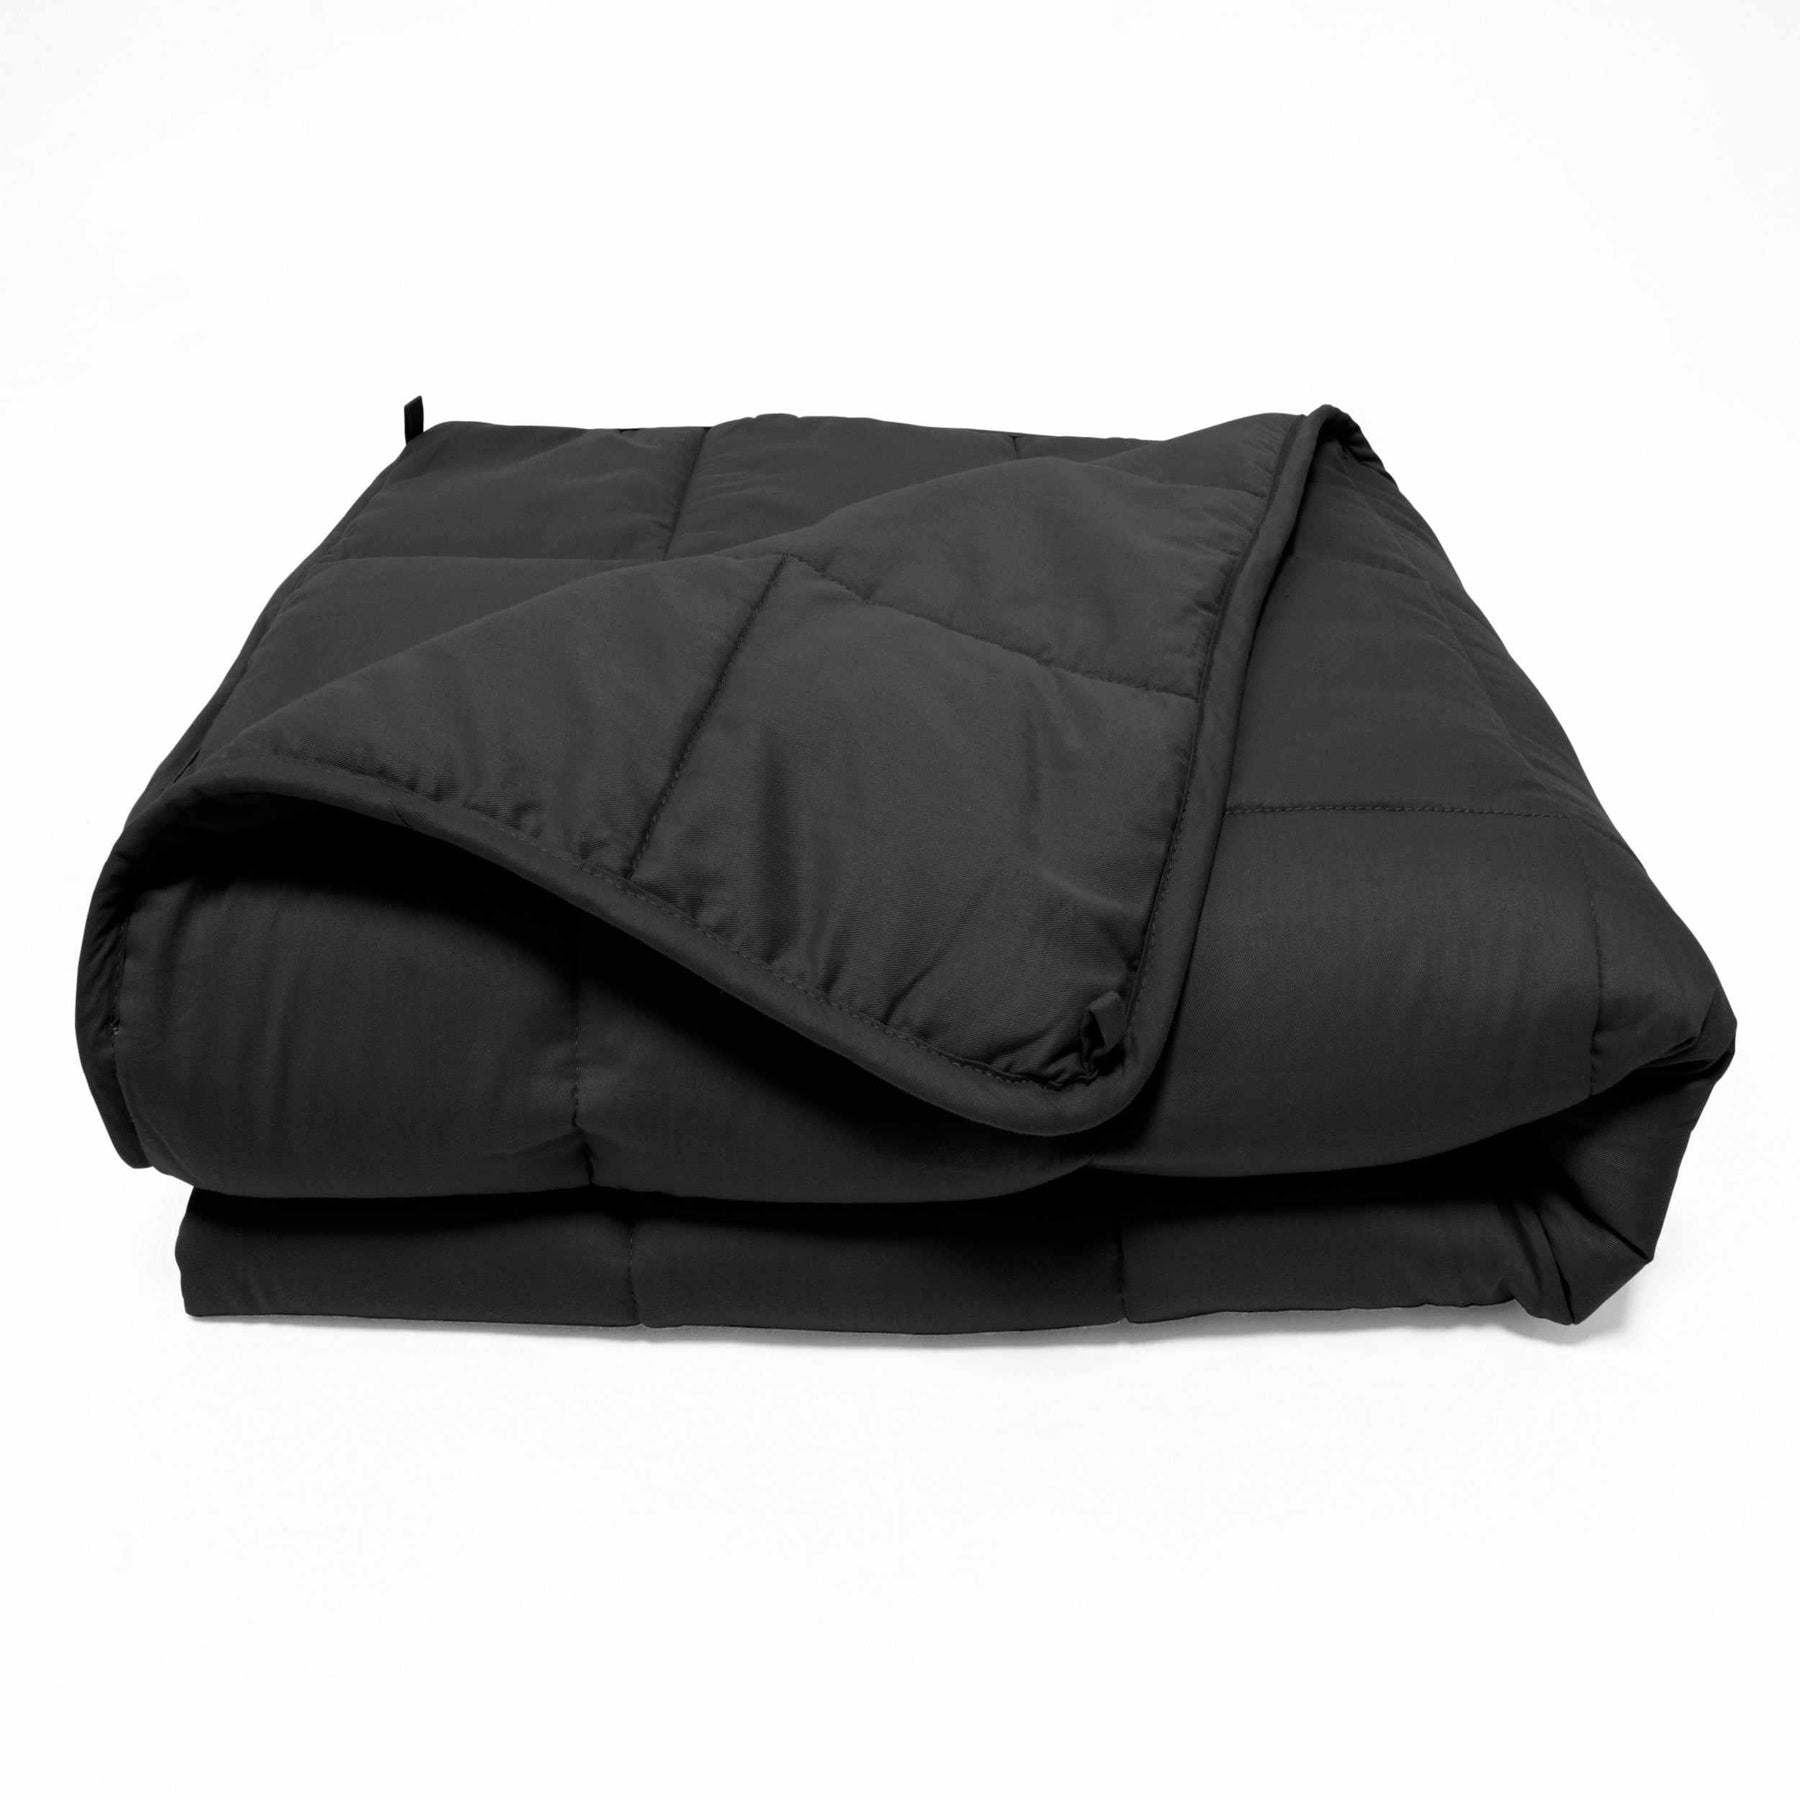 Weighted Quilted Cotton Throw Blanket - Black